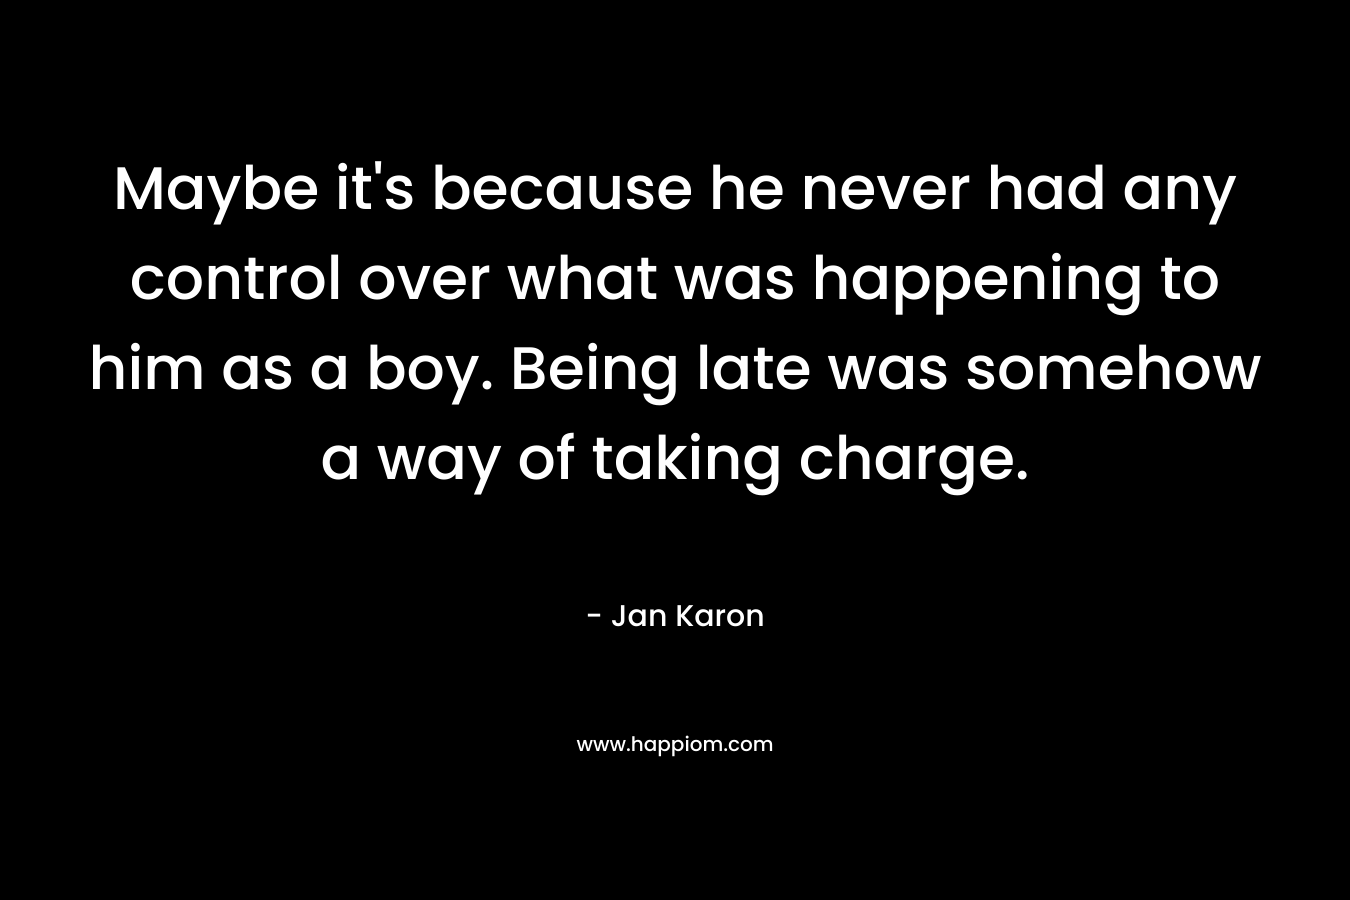 Maybe it’s because he never had any control over what was happening to him as a boy. Being late was somehow a way of taking charge. – Jan Karon